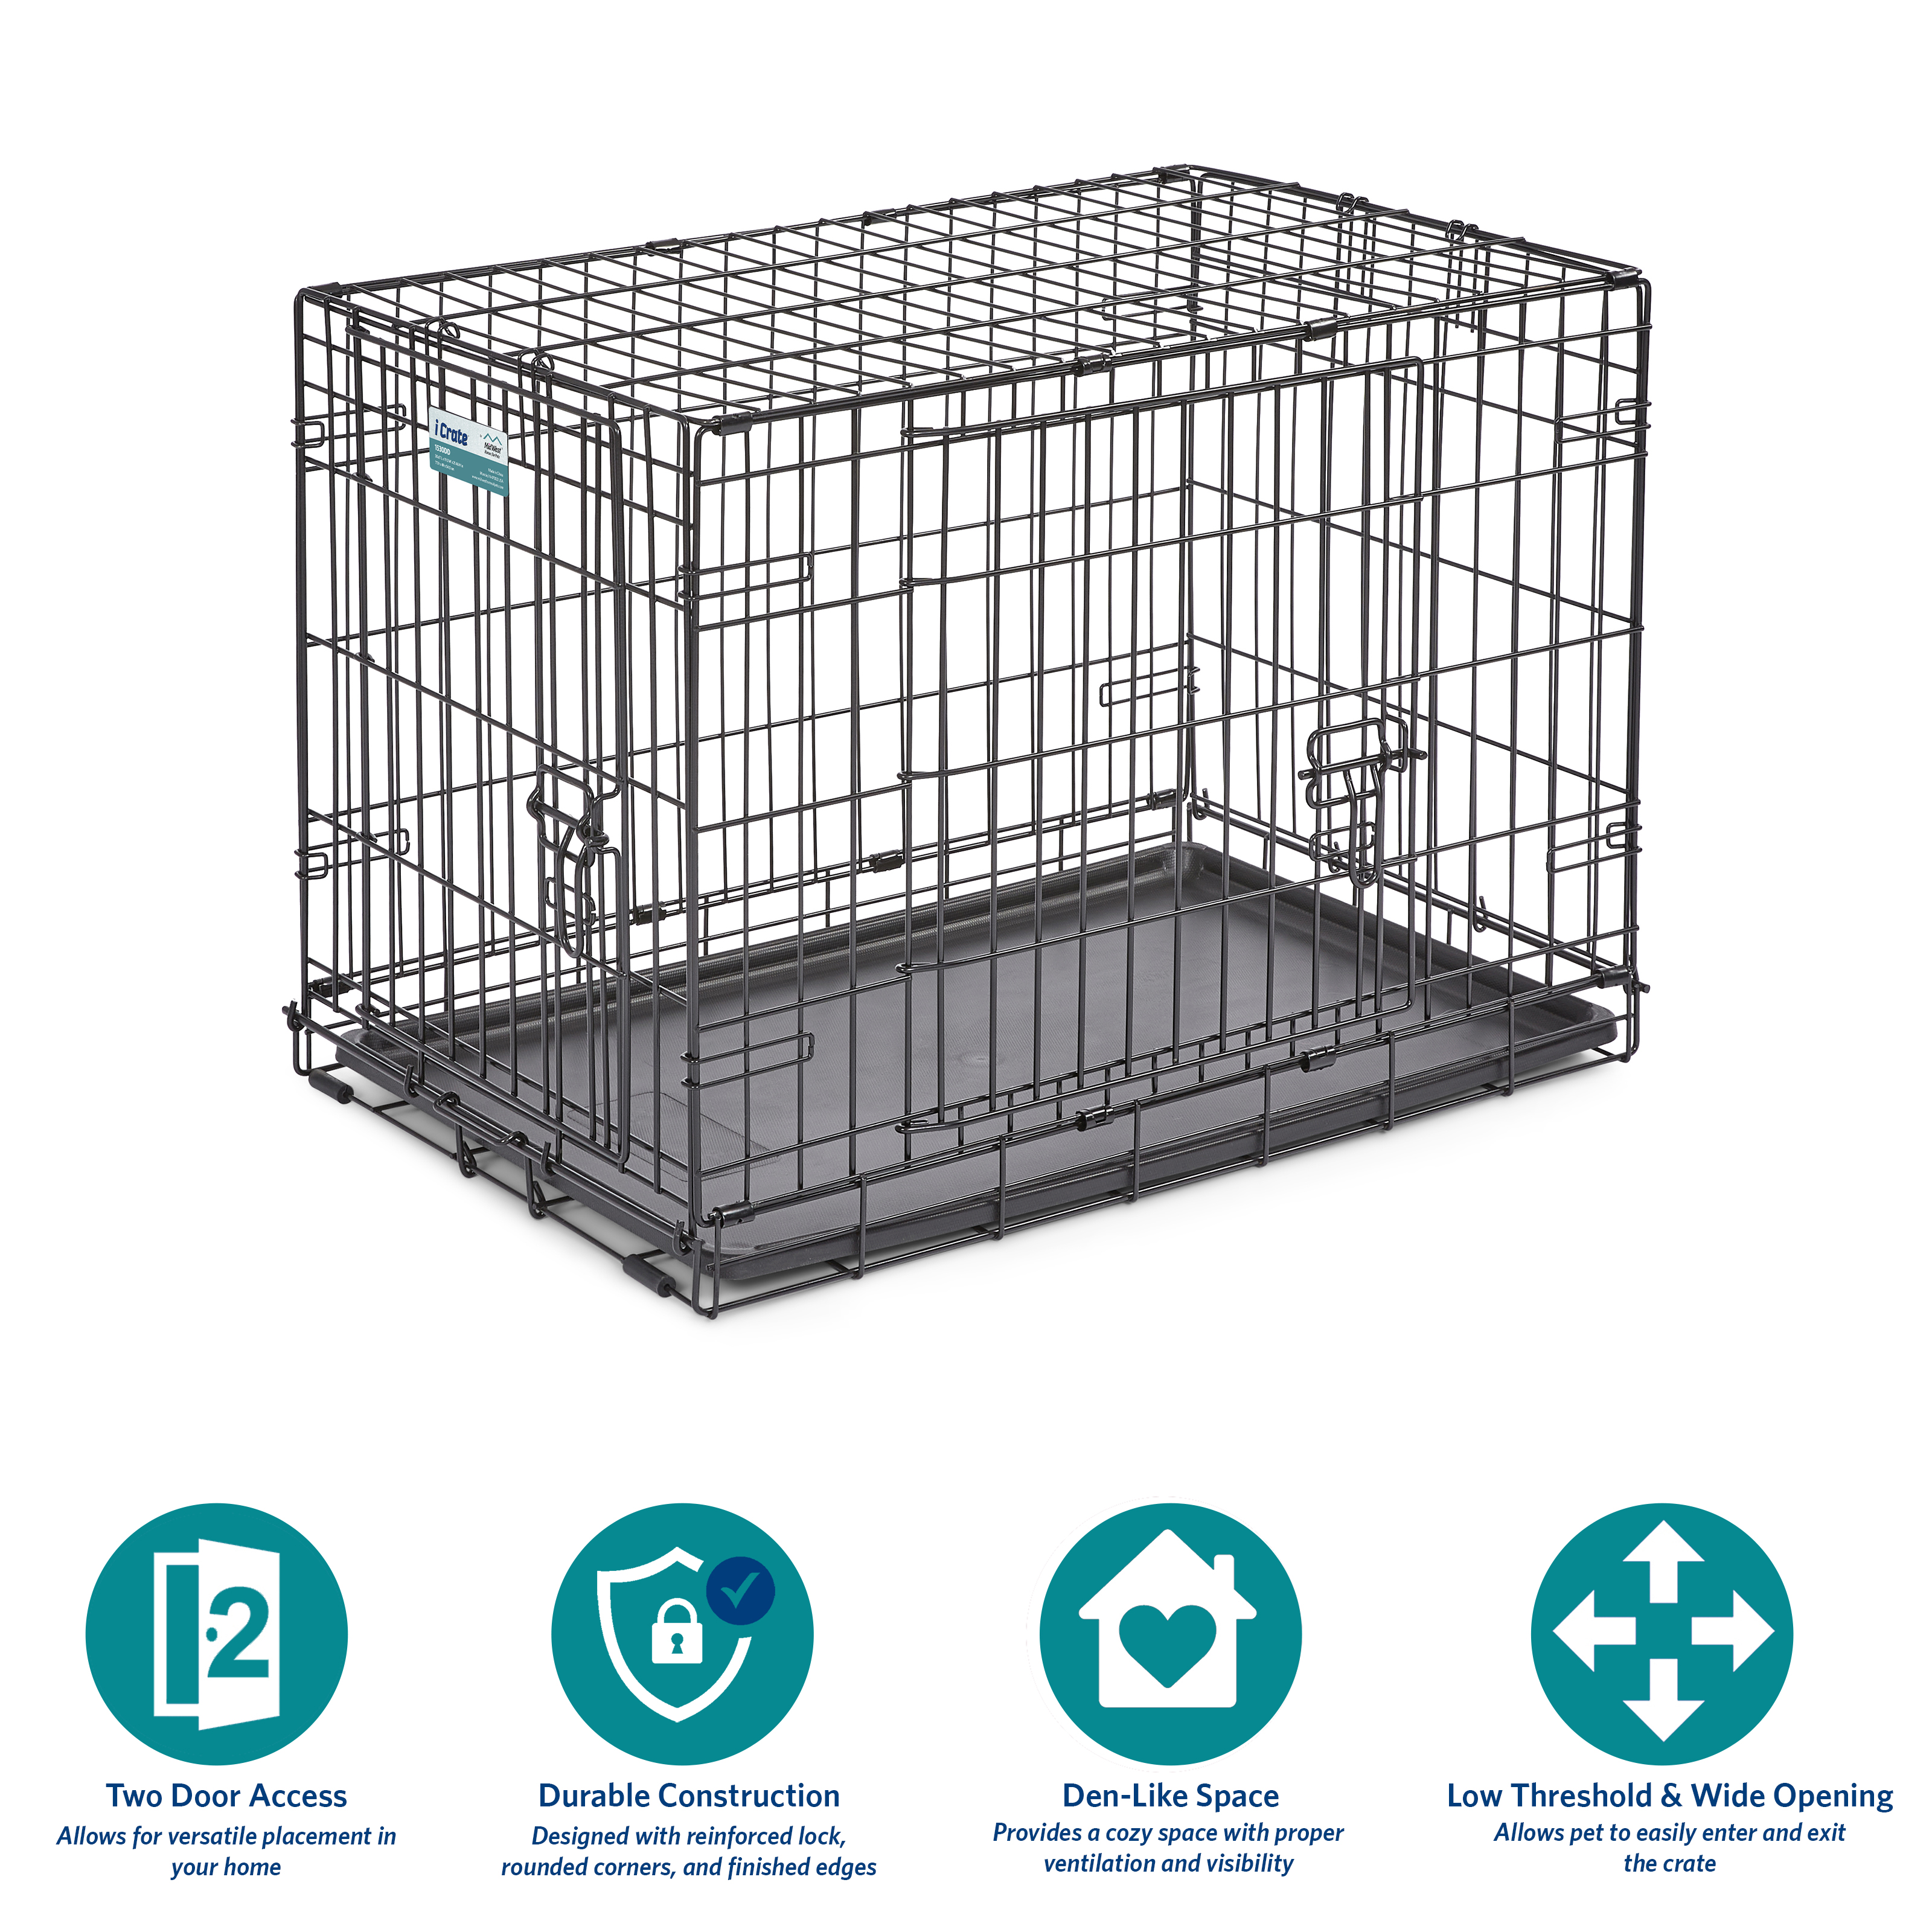 Medium Dog Crate | MidWest iCrate 30" Double Door Folding Metal Dog Crate | Divider Panel, Floor Protecting Feet & Dog Pan | 30L x 19W x 21H Inches, Medium Dog Breed - image 2 of 7